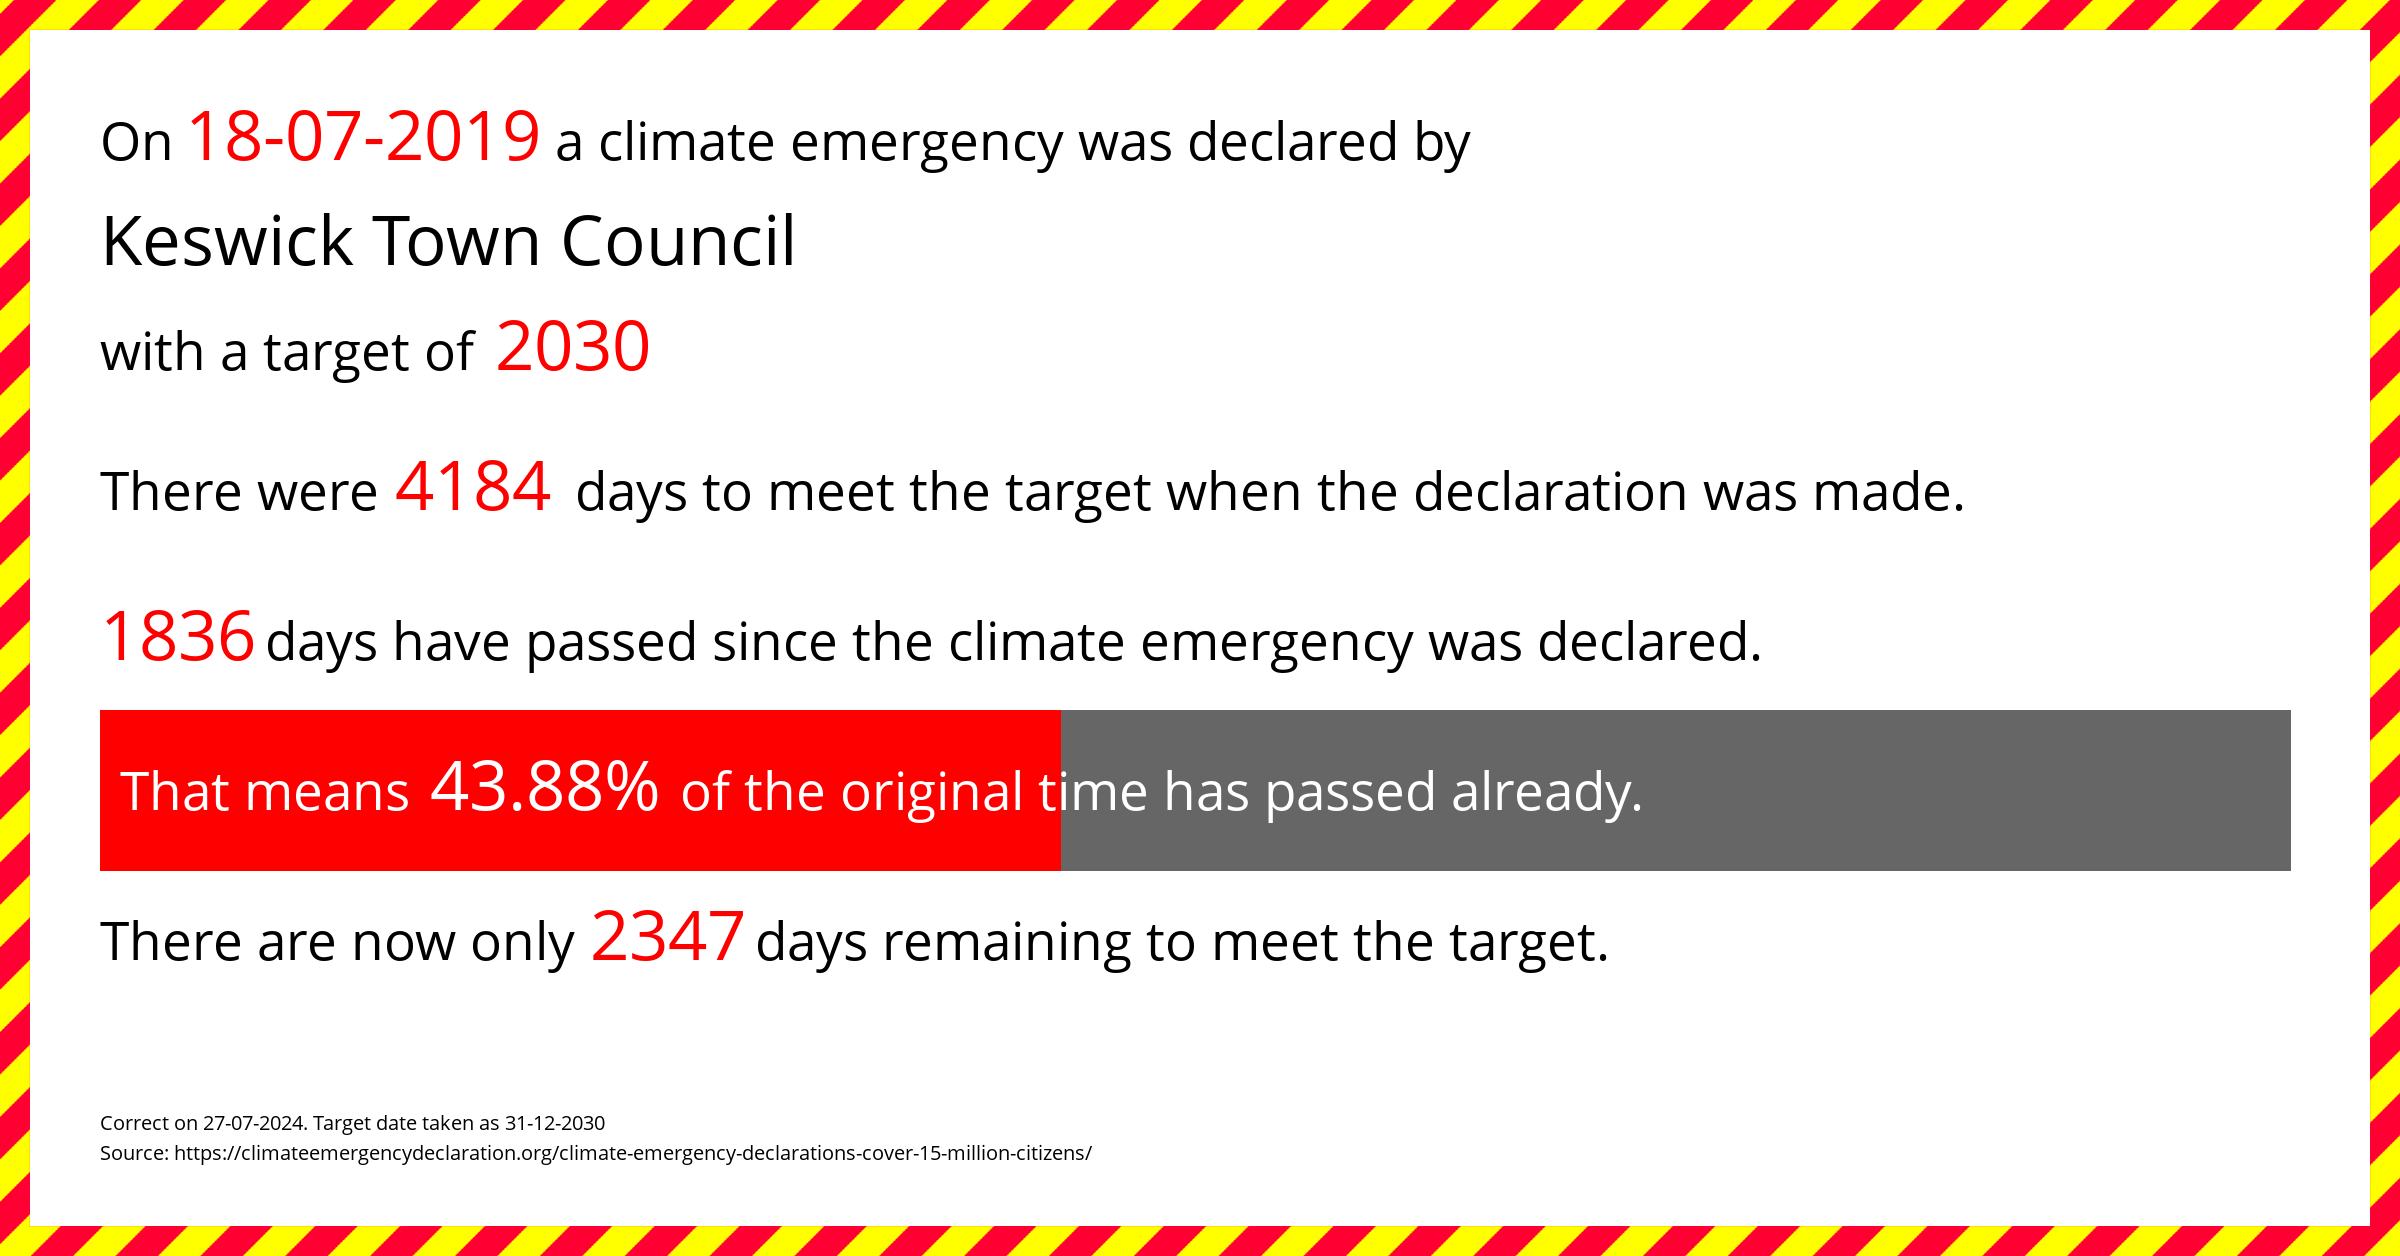 Keswick Town Council declared a Climate emergency on Thursday 18th July 2019, with a target of 2030.